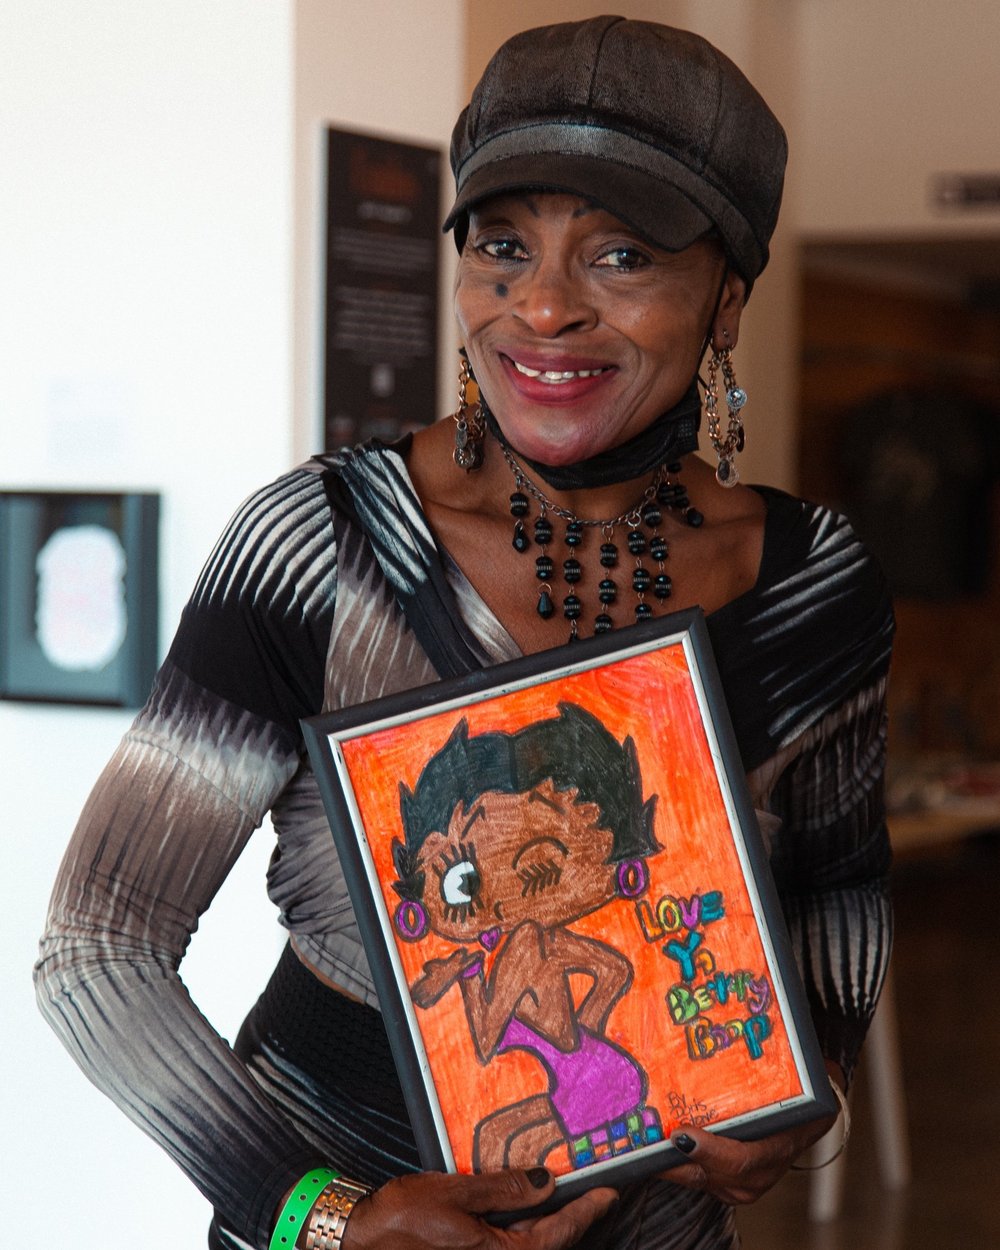  Doris presents the artwork she made of the true Betty Boop, which I am now the proud owner of. 